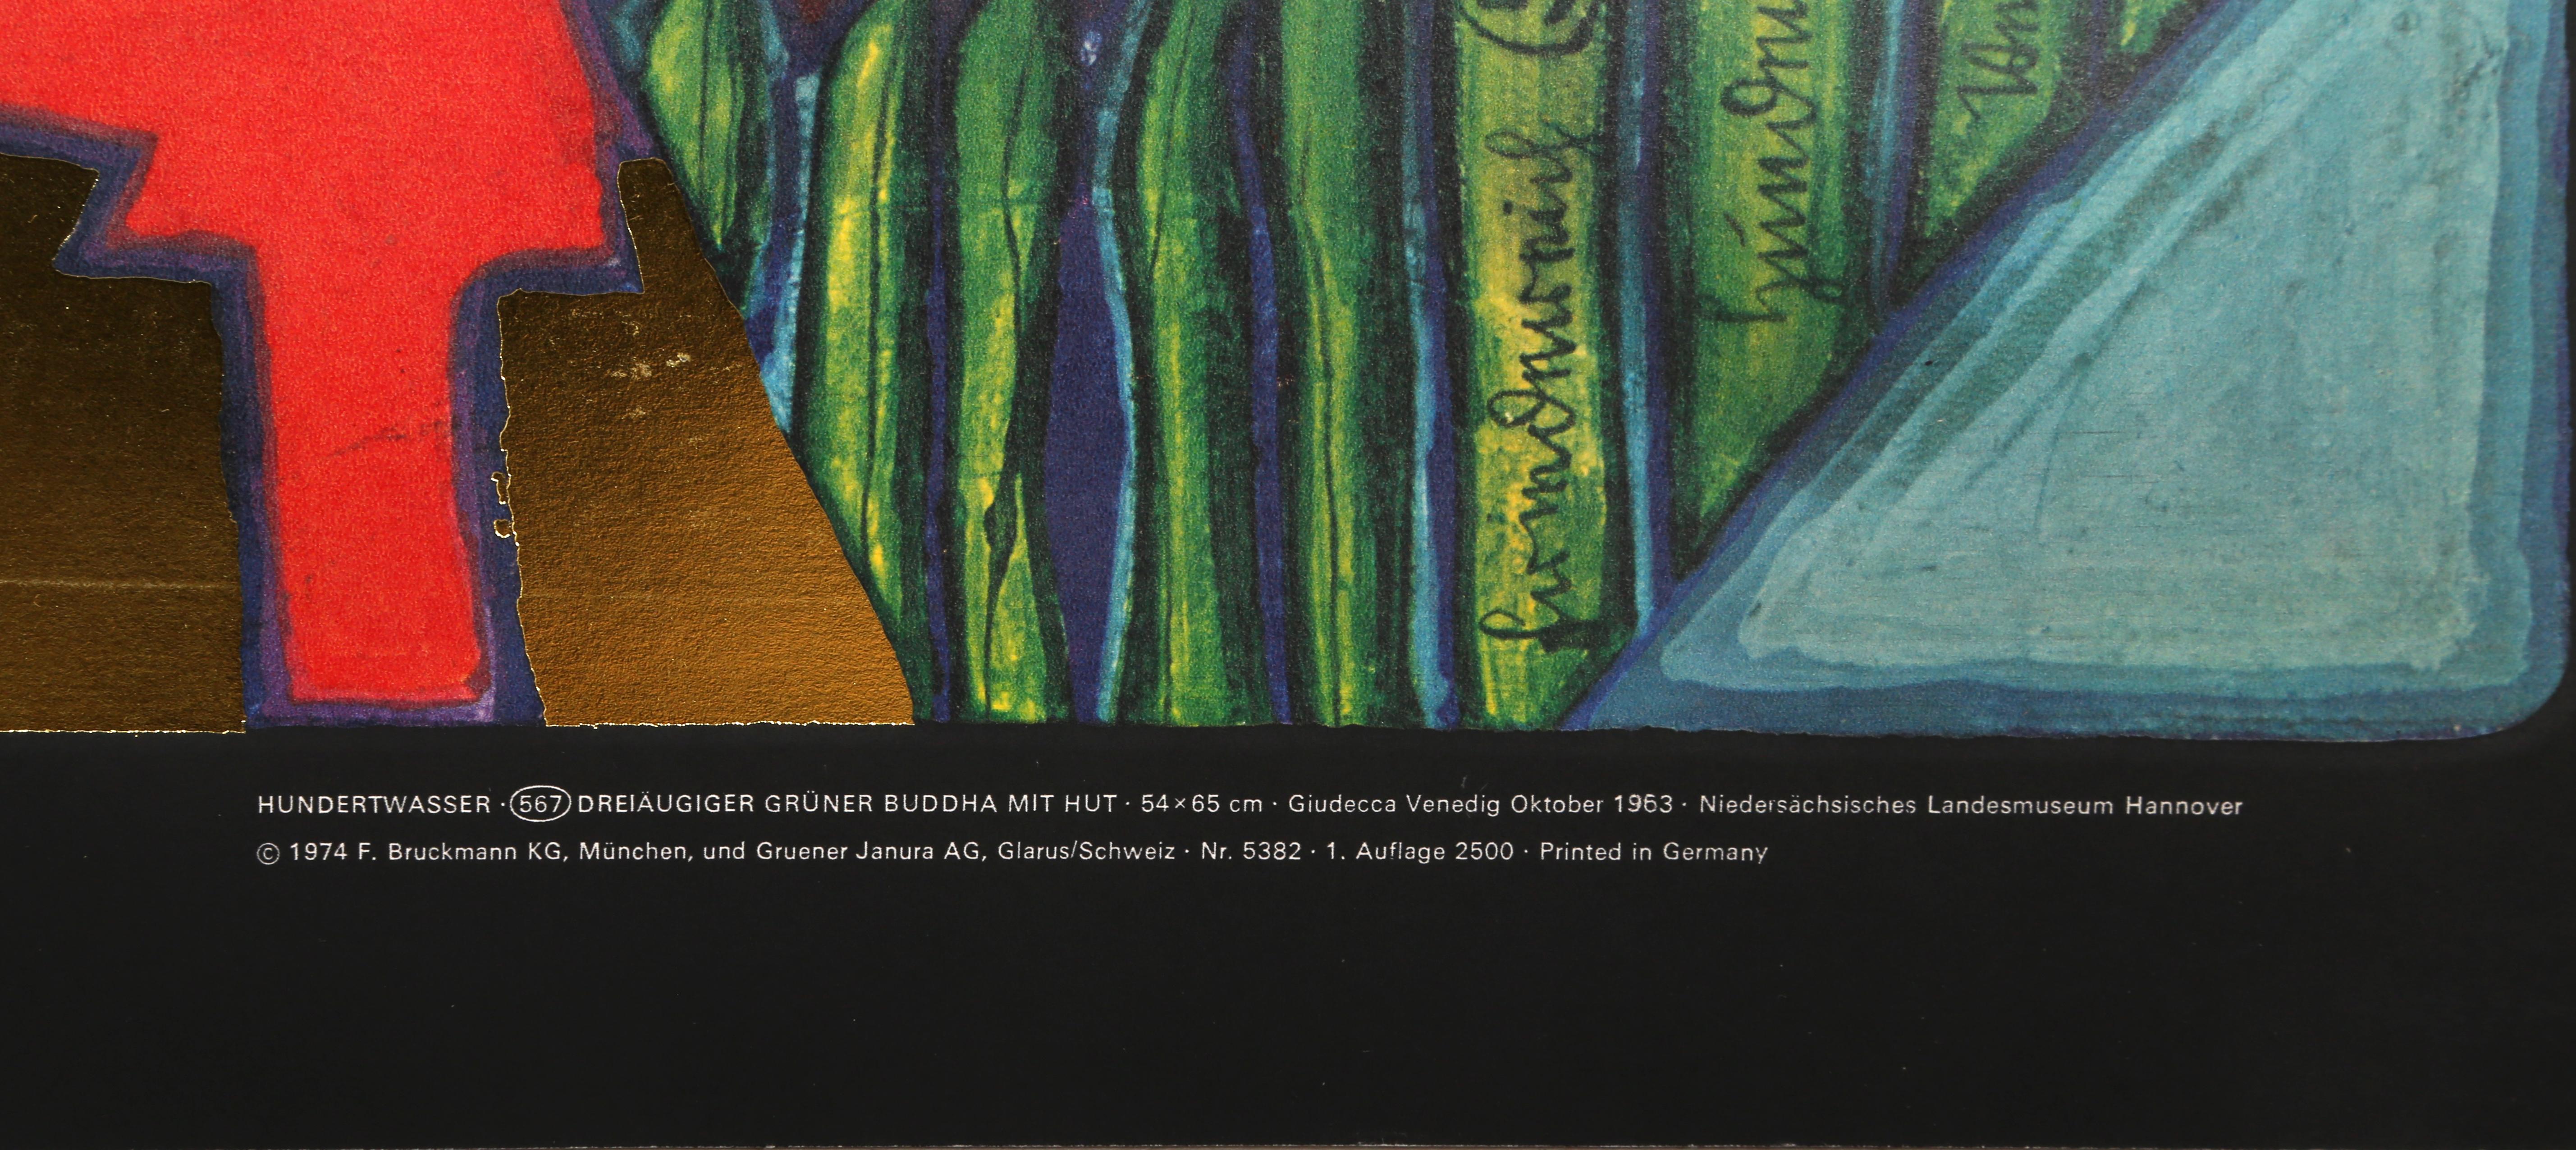 This is a colorful foil-embossed poster after the effervescent Austrian-born New Zealand artist Friedensreich Hundertwasser, a high-quality, authorized reproduction of his painting 